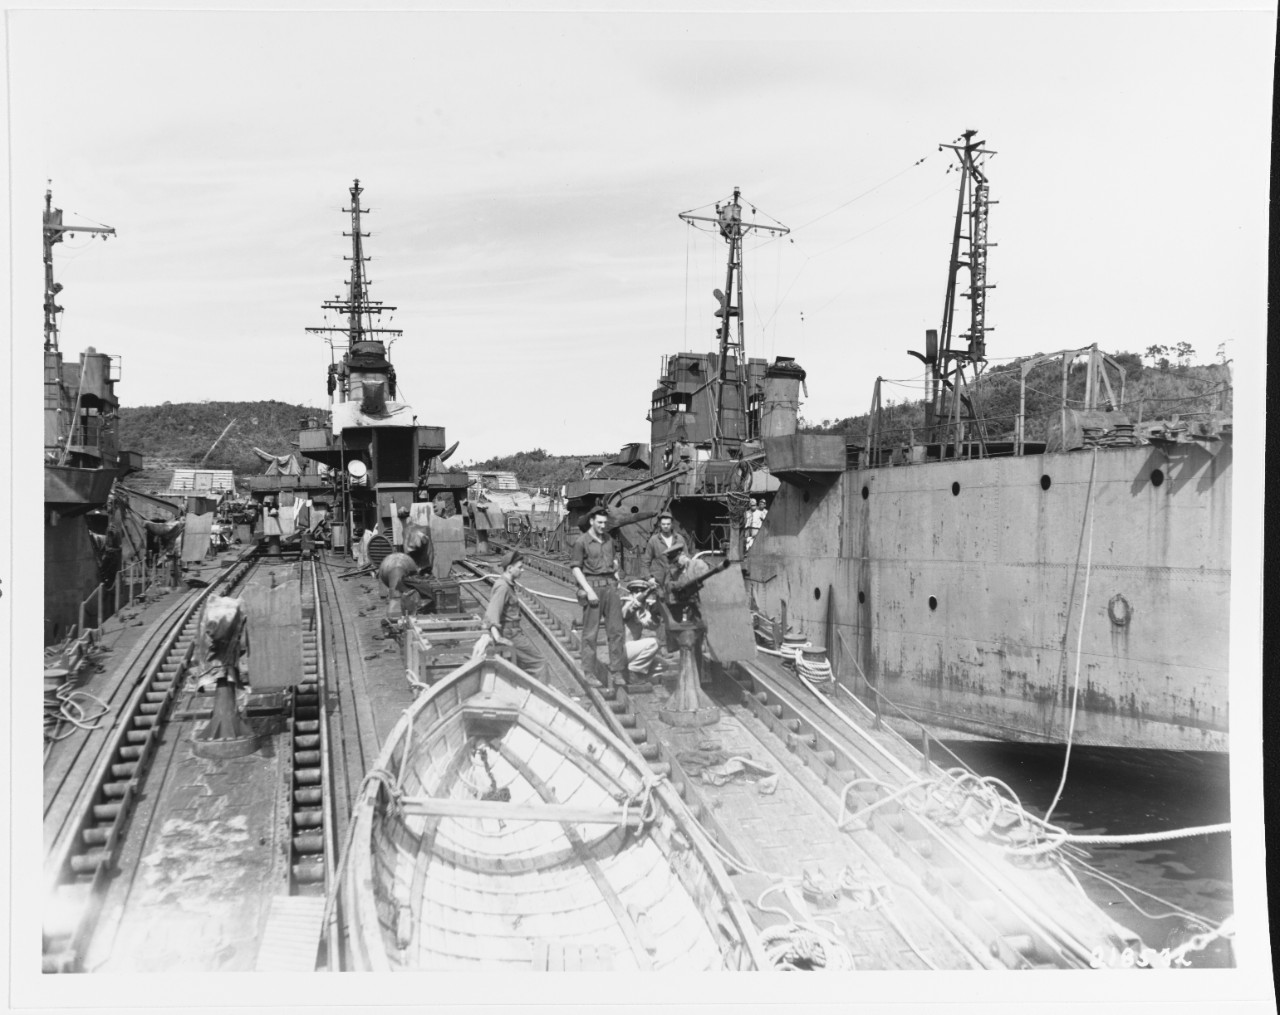 Japanese Landing Ships being disarmed by U.S. personnel at Sasebo, Japan. October 19, 1945